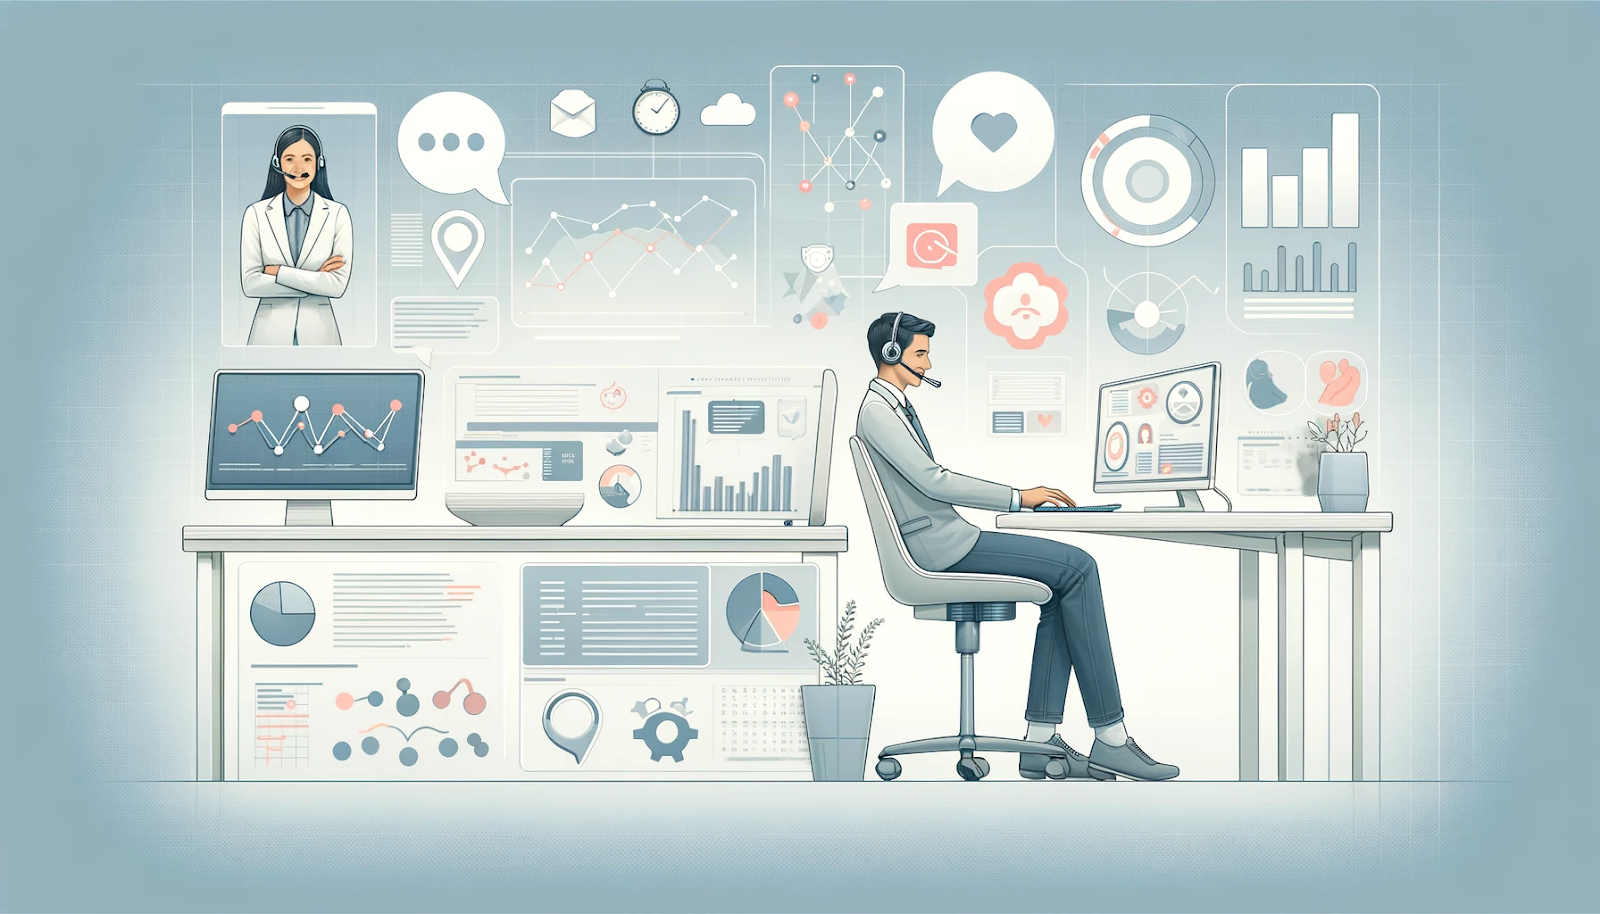 Illustration showing a transition from customer support to data analytics. On the left, a customer service representative with a headset is surrounded by speech bubbles, a laptop, and a chat interface. The right side shows a person analyzing data with graphs and charts on a computer screen, amidst data visualizations and statistical tools. The background is a smooth transition from a support desk to a data science workspace.